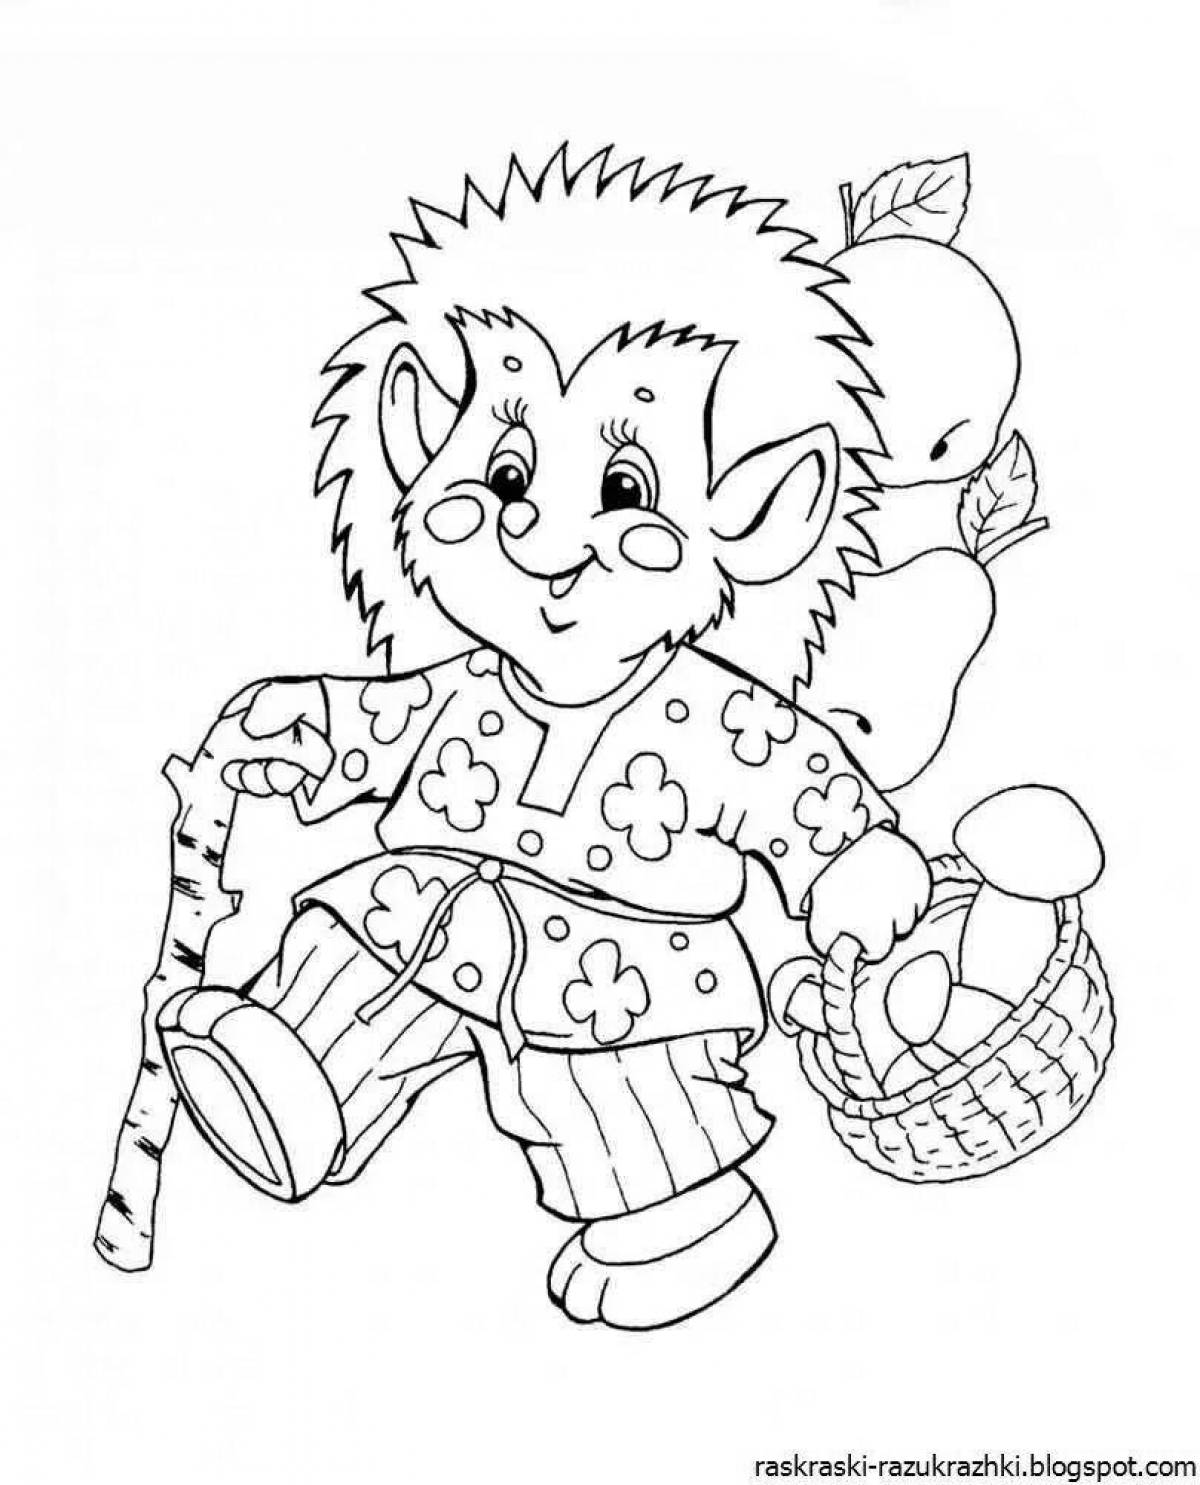 Adorable fairy tale coloring pages